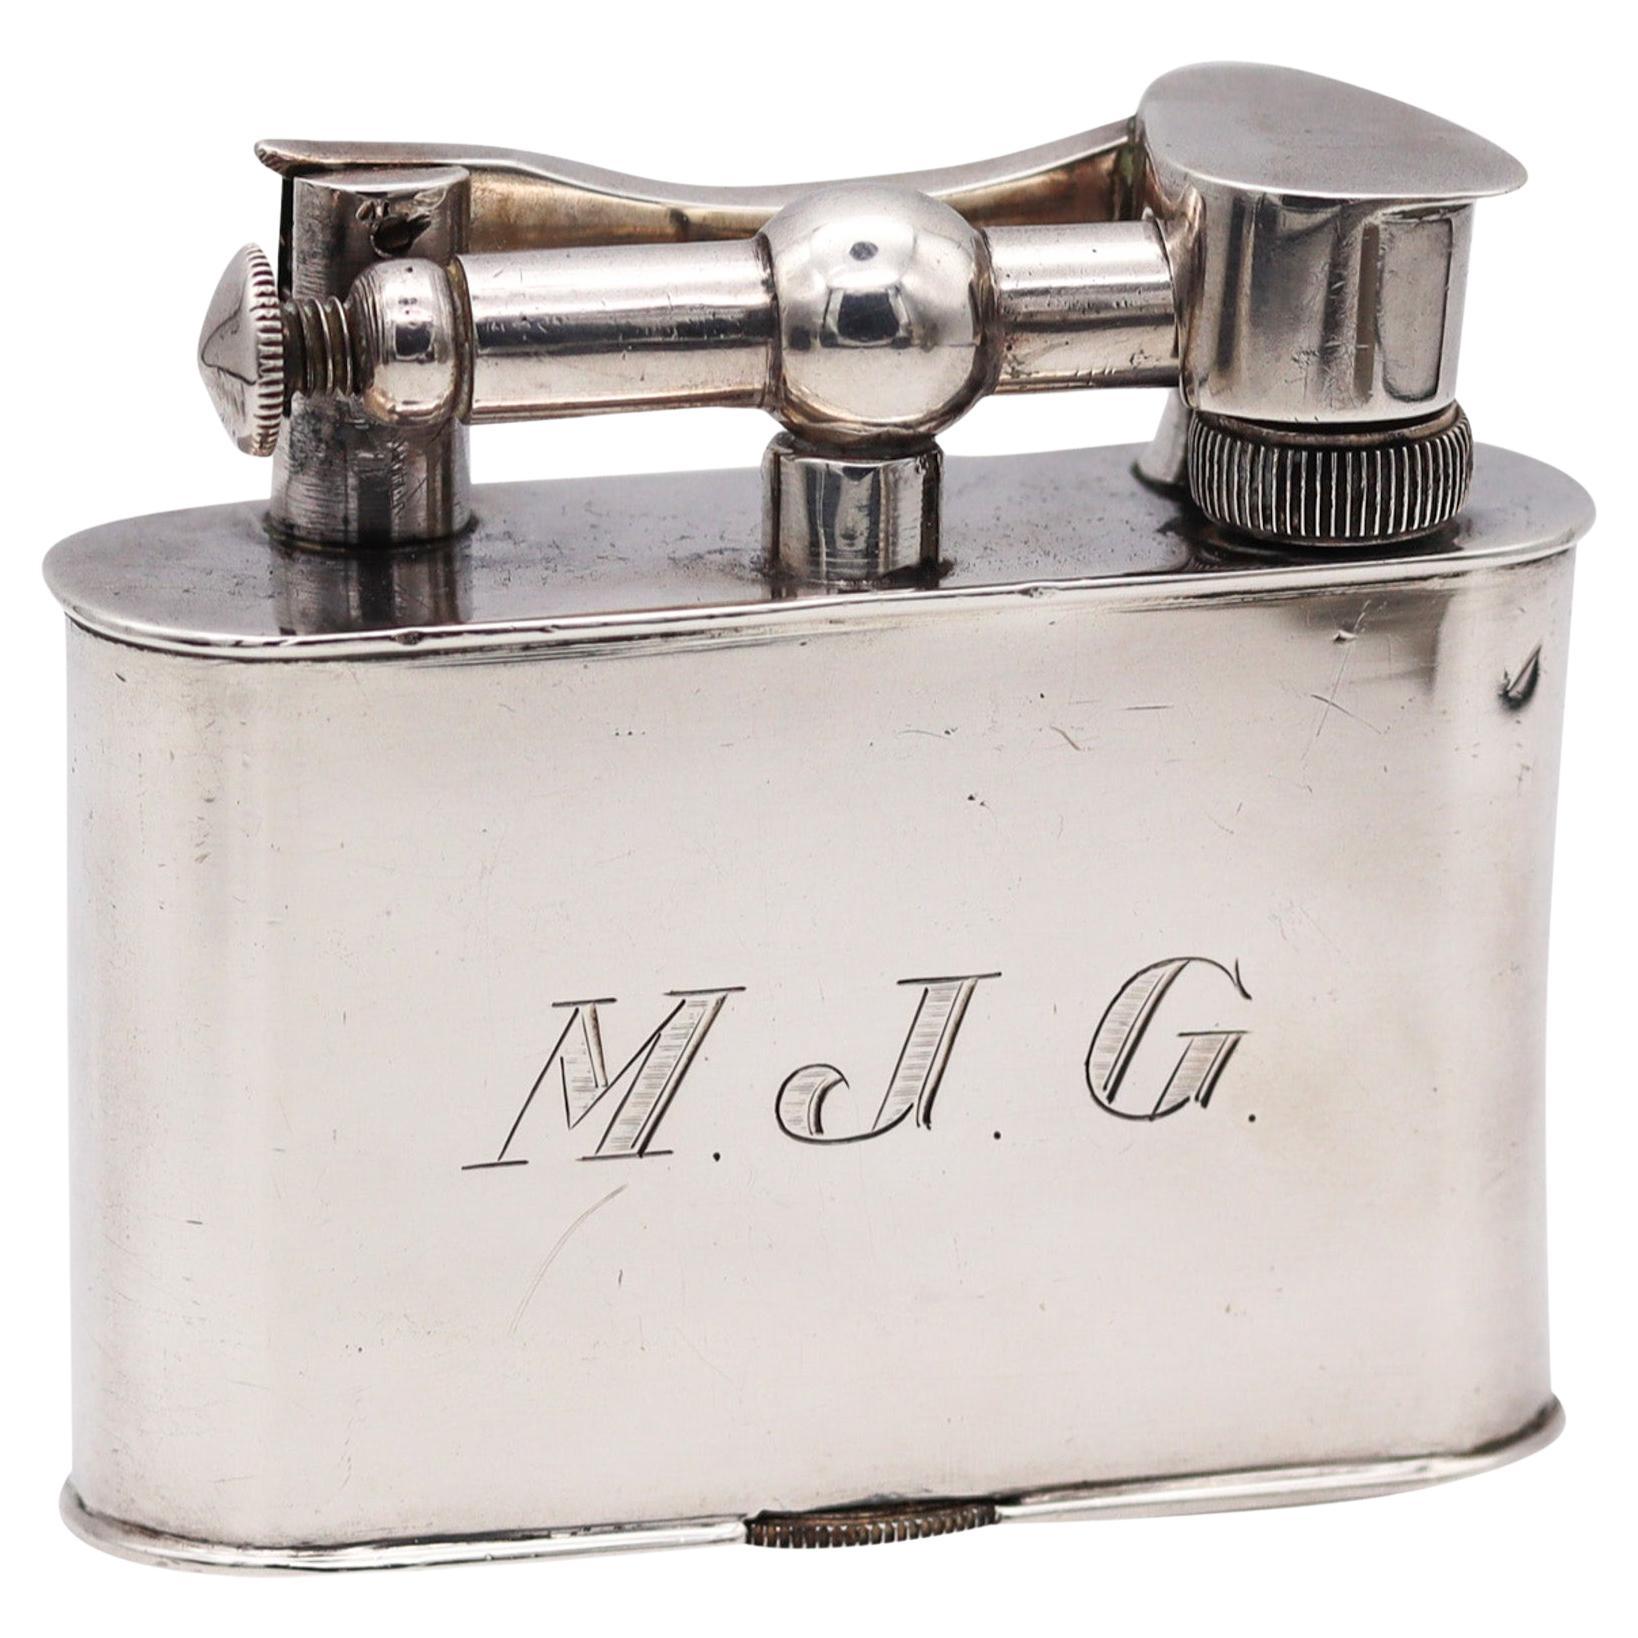 Mexico Taxco 1940 Giant Unique Lift Arm Petrol Lighter Solid 925 Sterling Silver For Sale